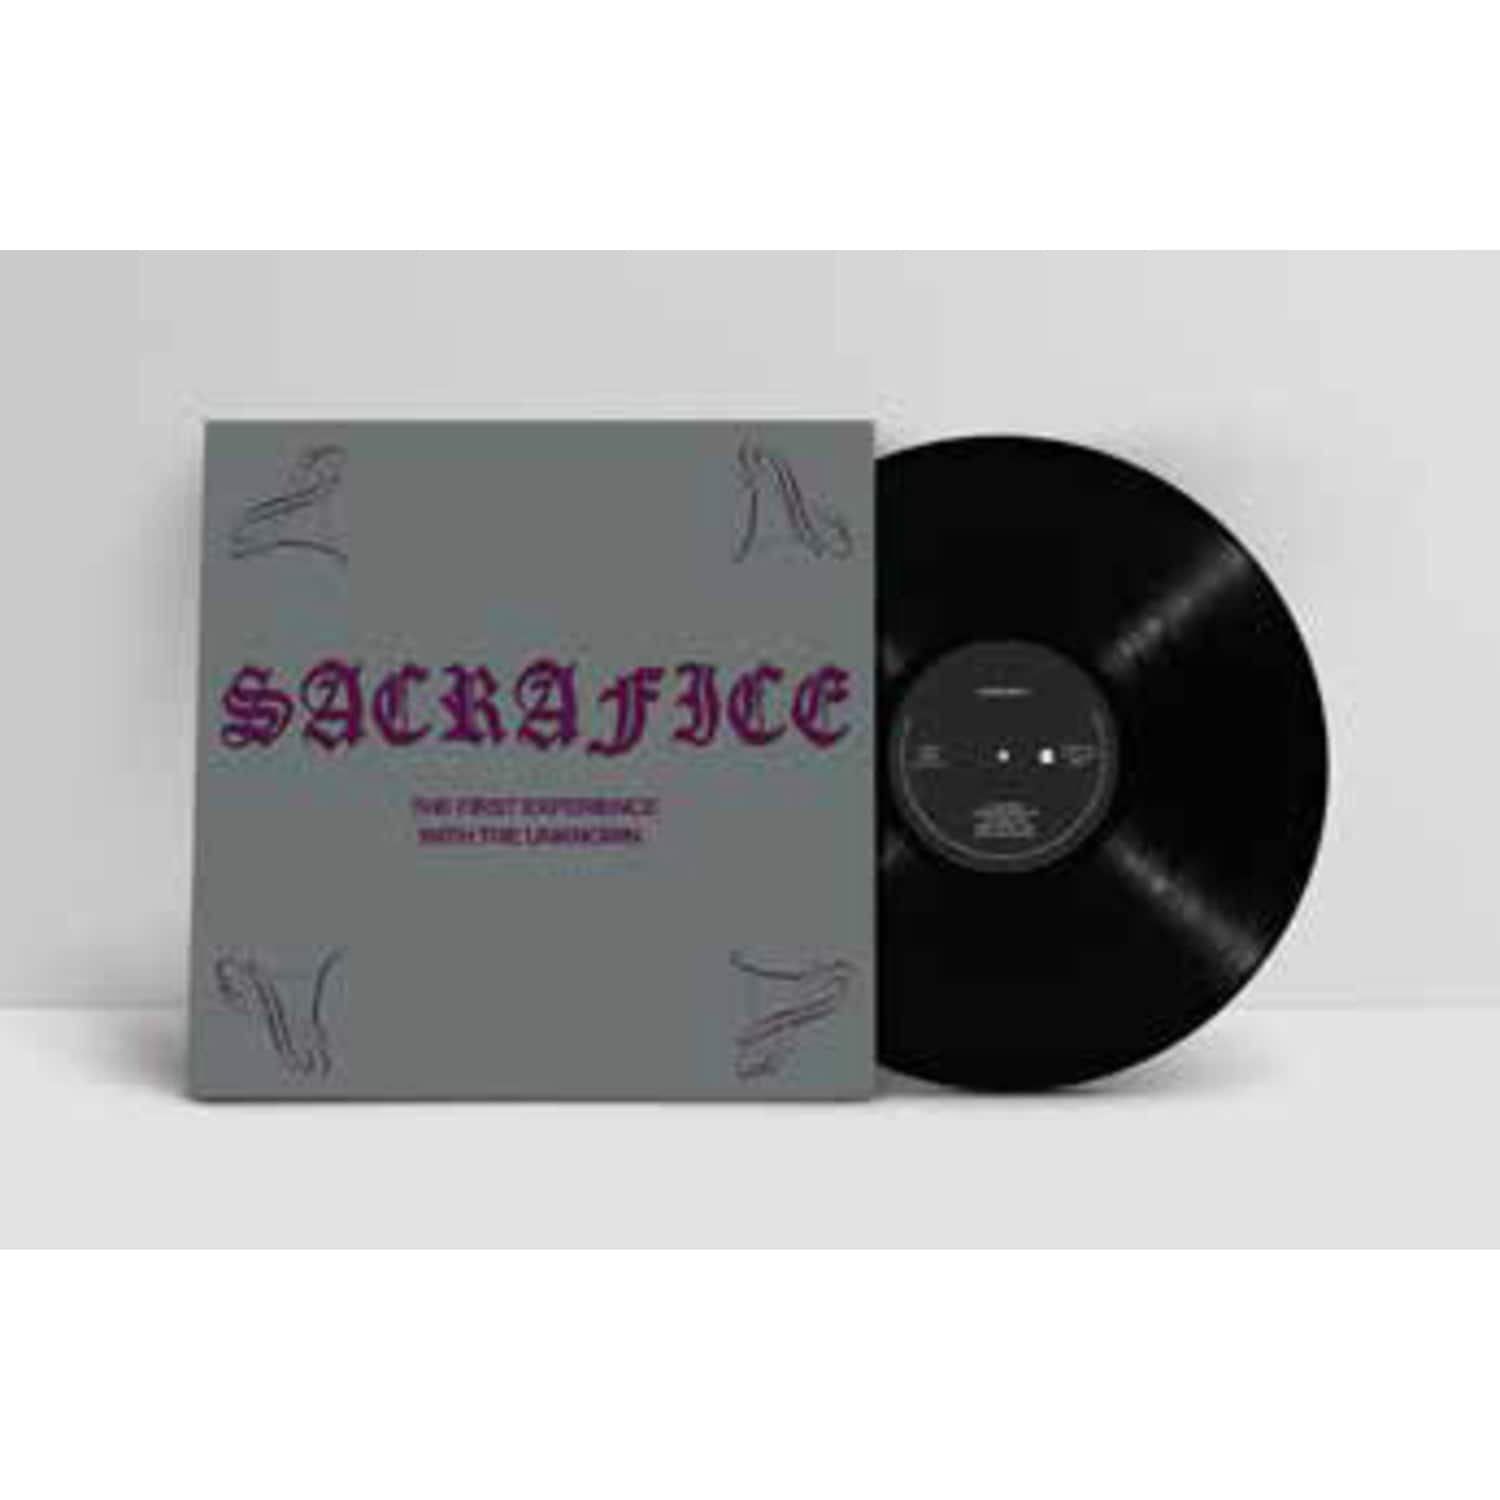 Sacrafice - THE FIRST EXPERIENCE WITH THE UNKNOWN 